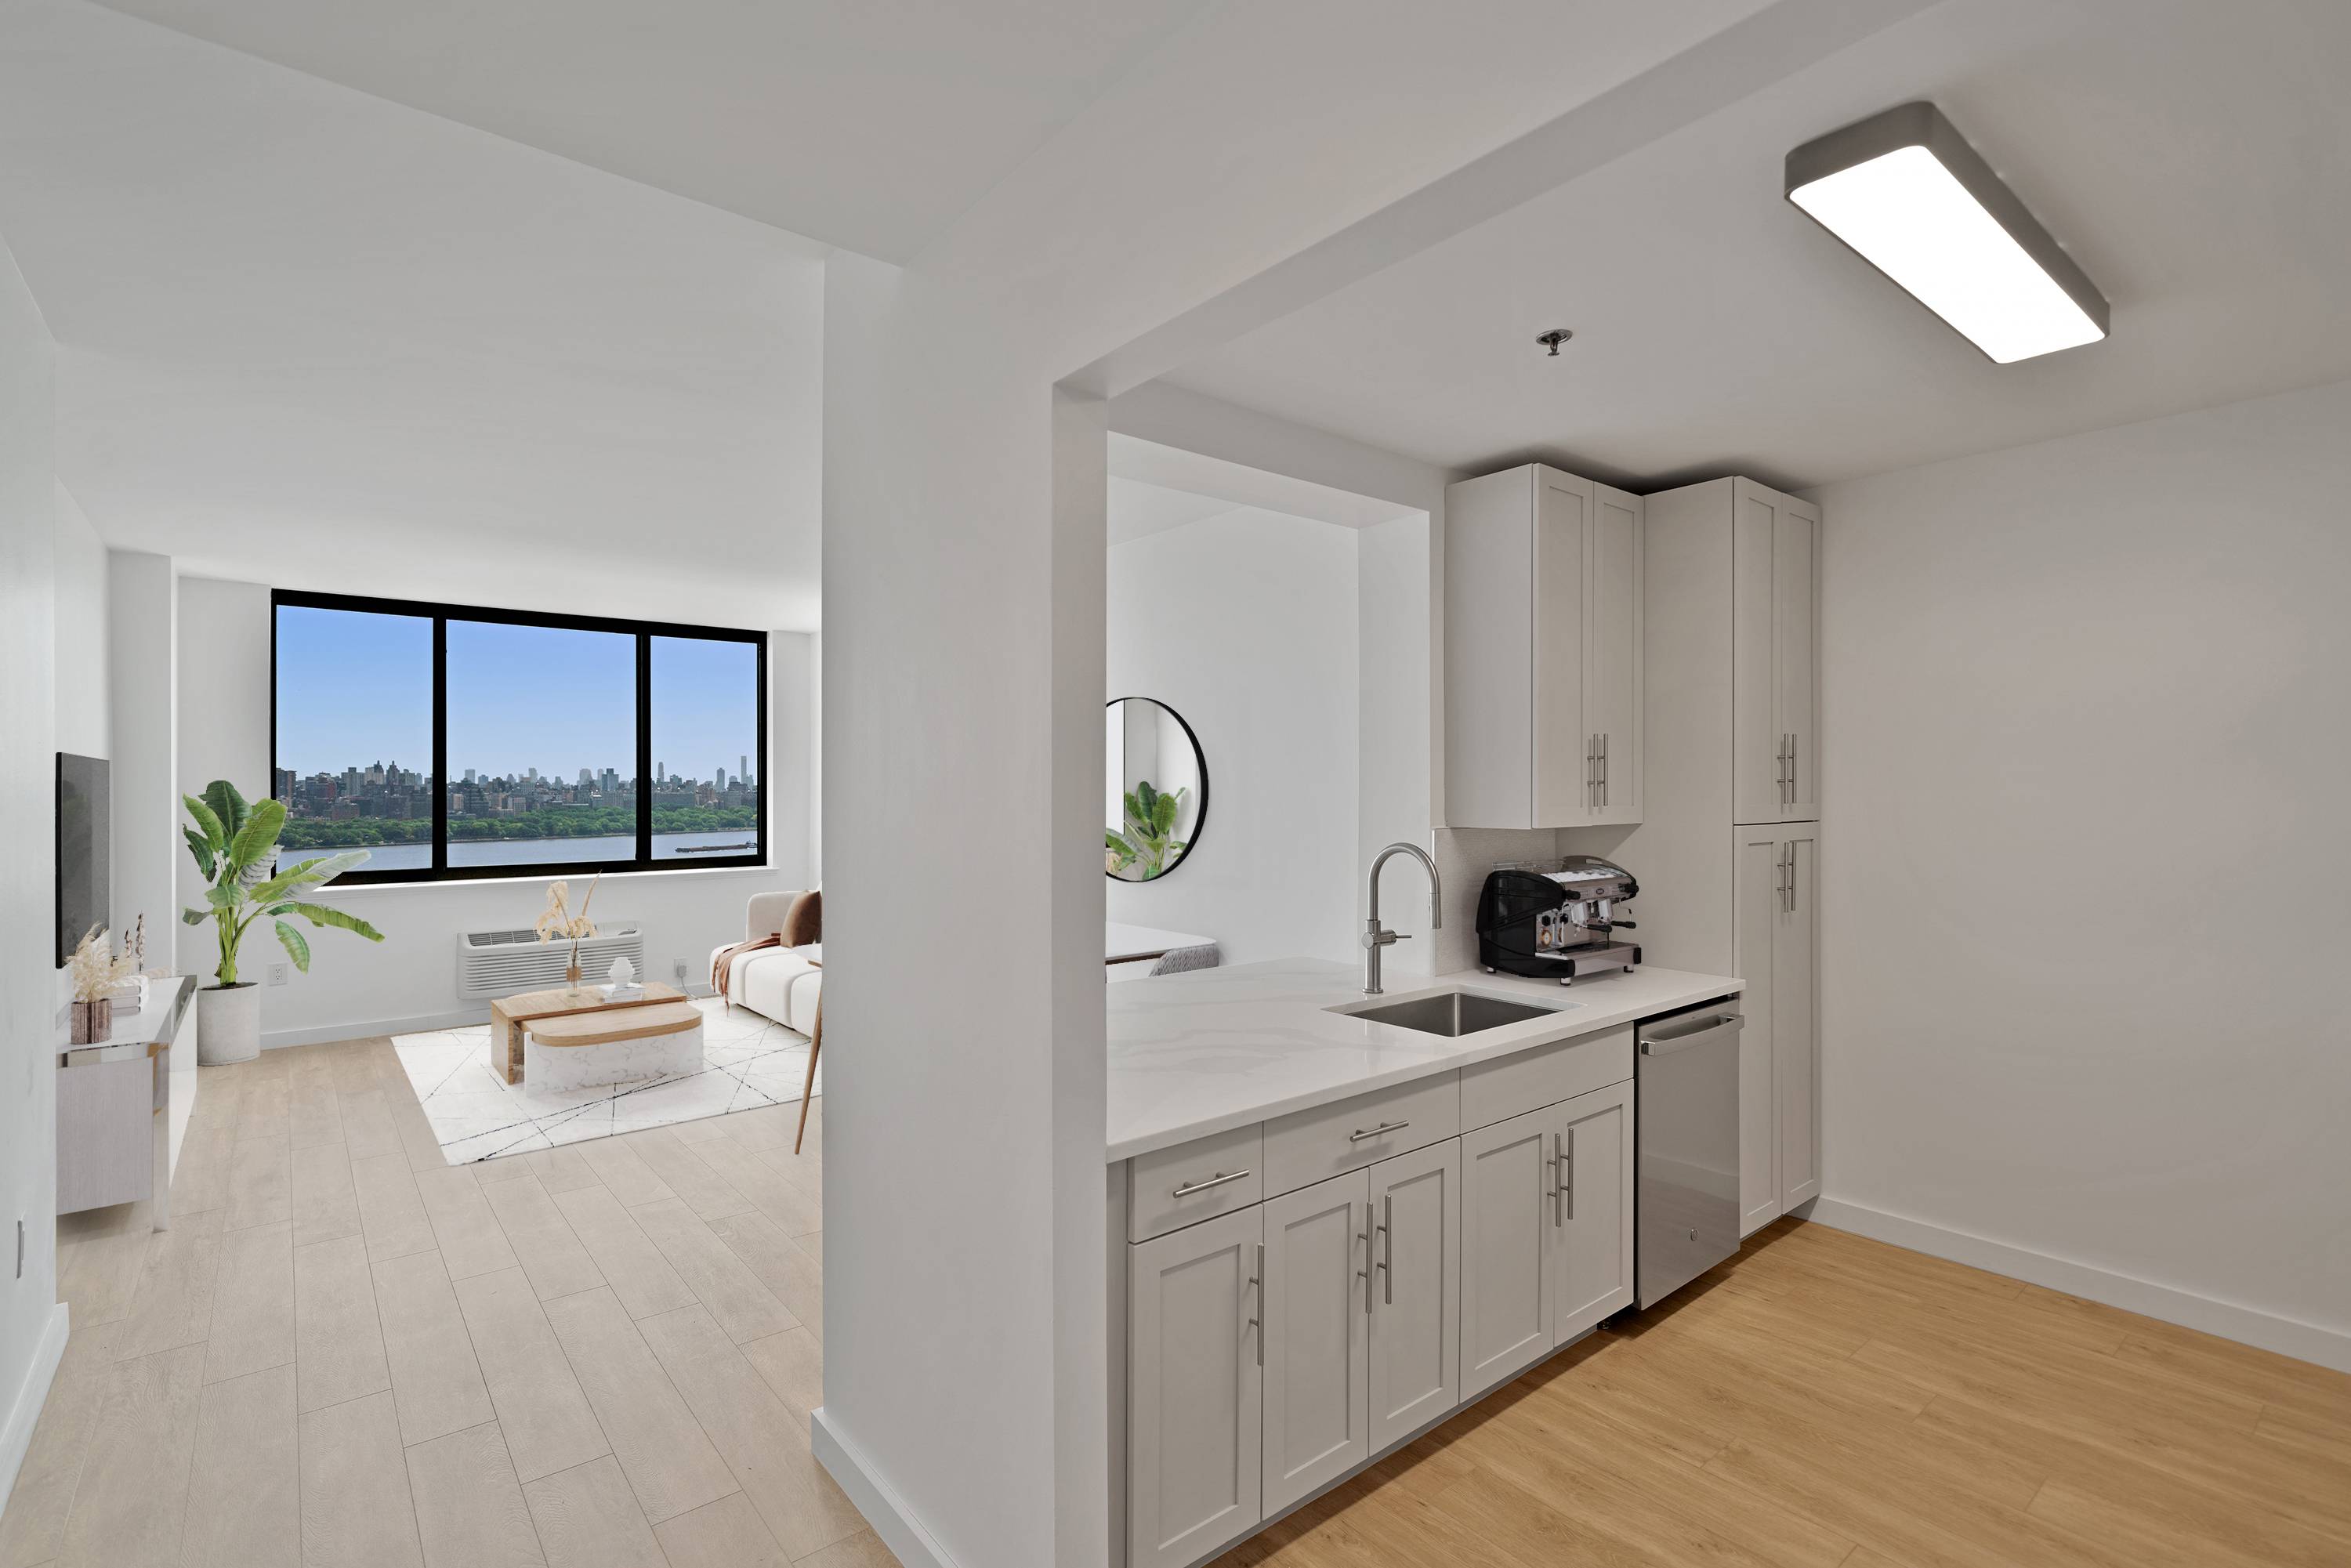 Newly Renovated 2 Bedroom 2 Bath Apartment now available at The Riello Edgewater!  Eastern NYC Views from Every Room!  All New Luxury Amenities!